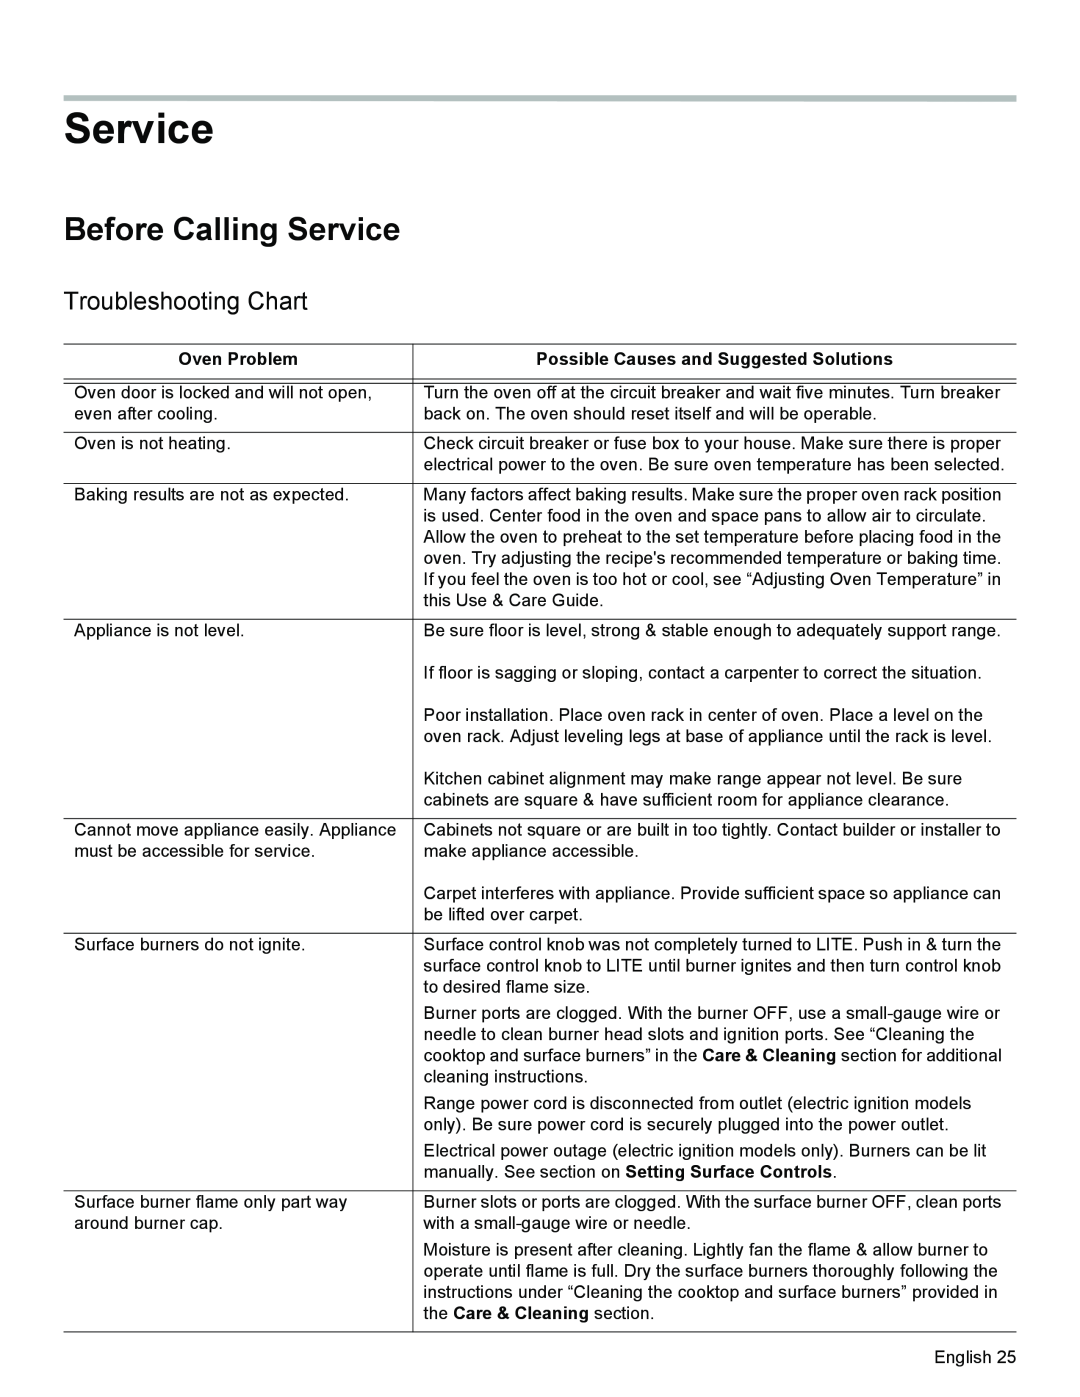 Bosch Appliances HGS3053UC Before Calling Service, Troubleshooting Chart, Oven Problem, the Care & Cleaning section 